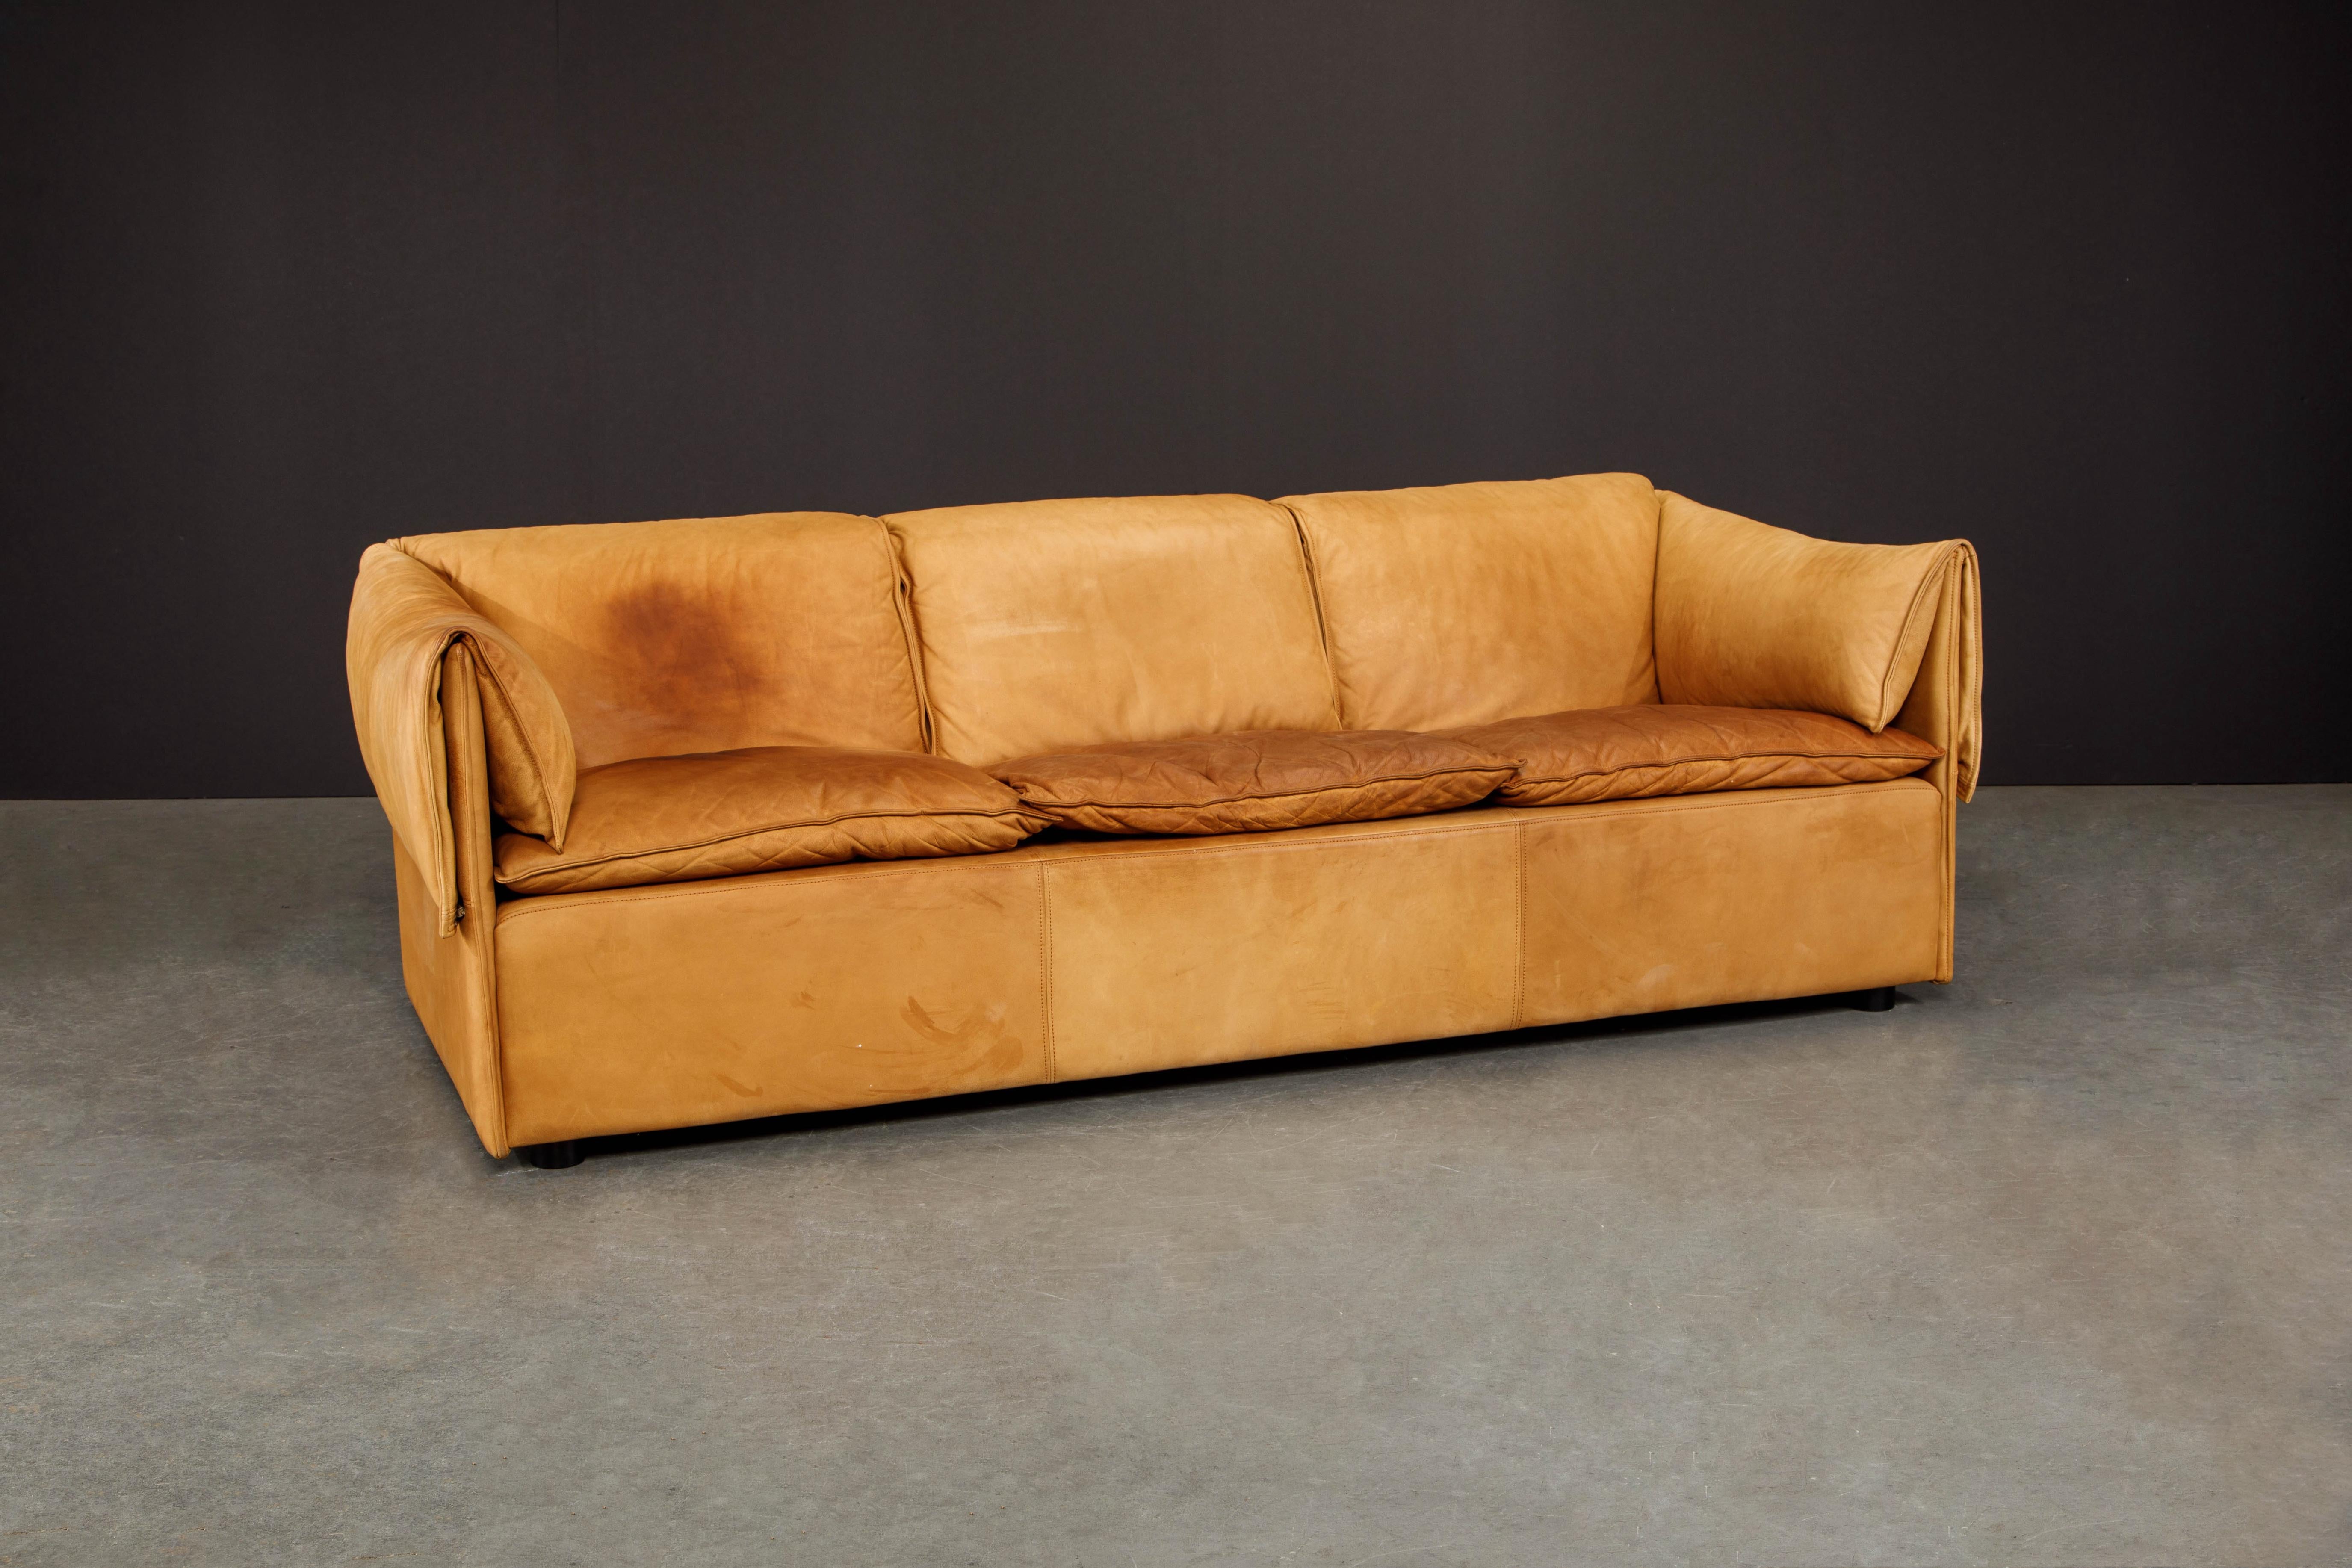 can bed bugs be in leather couches